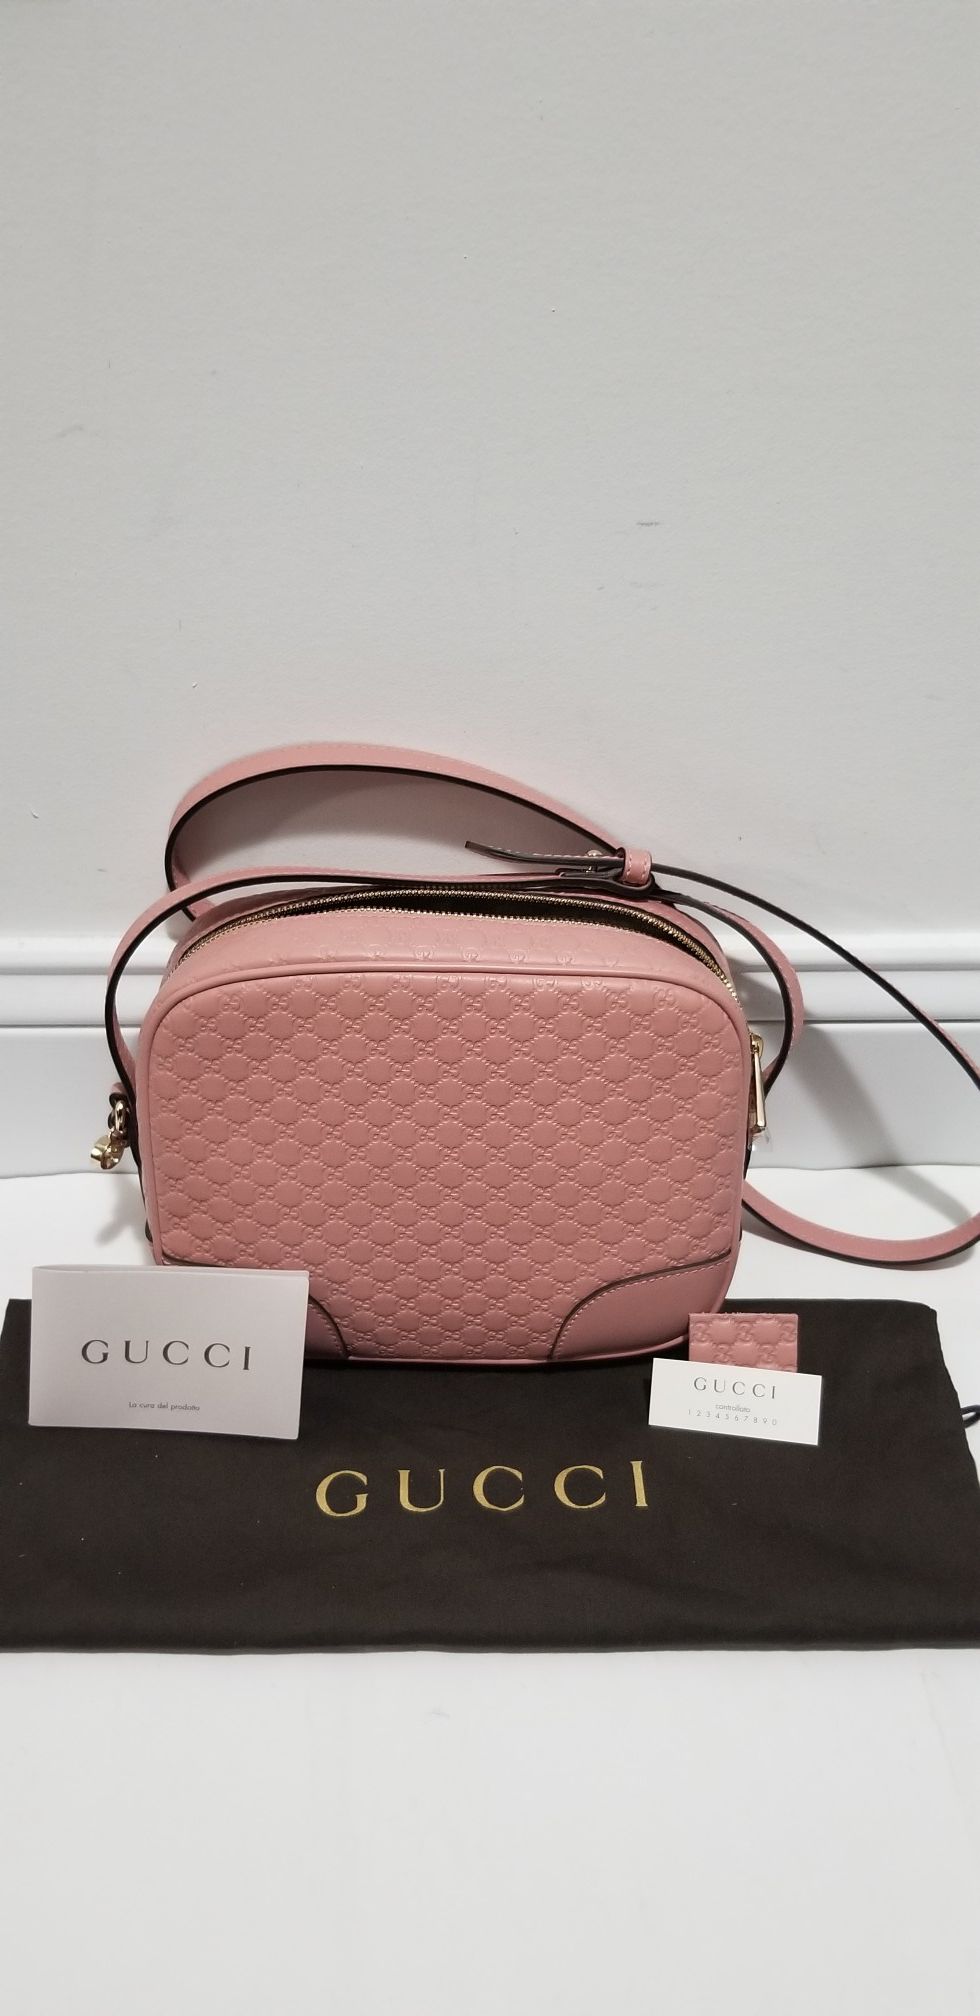 SBrand New 100% Authentic Pink GG Womens Gucci Leather Messenger Cross Body Bag Purse